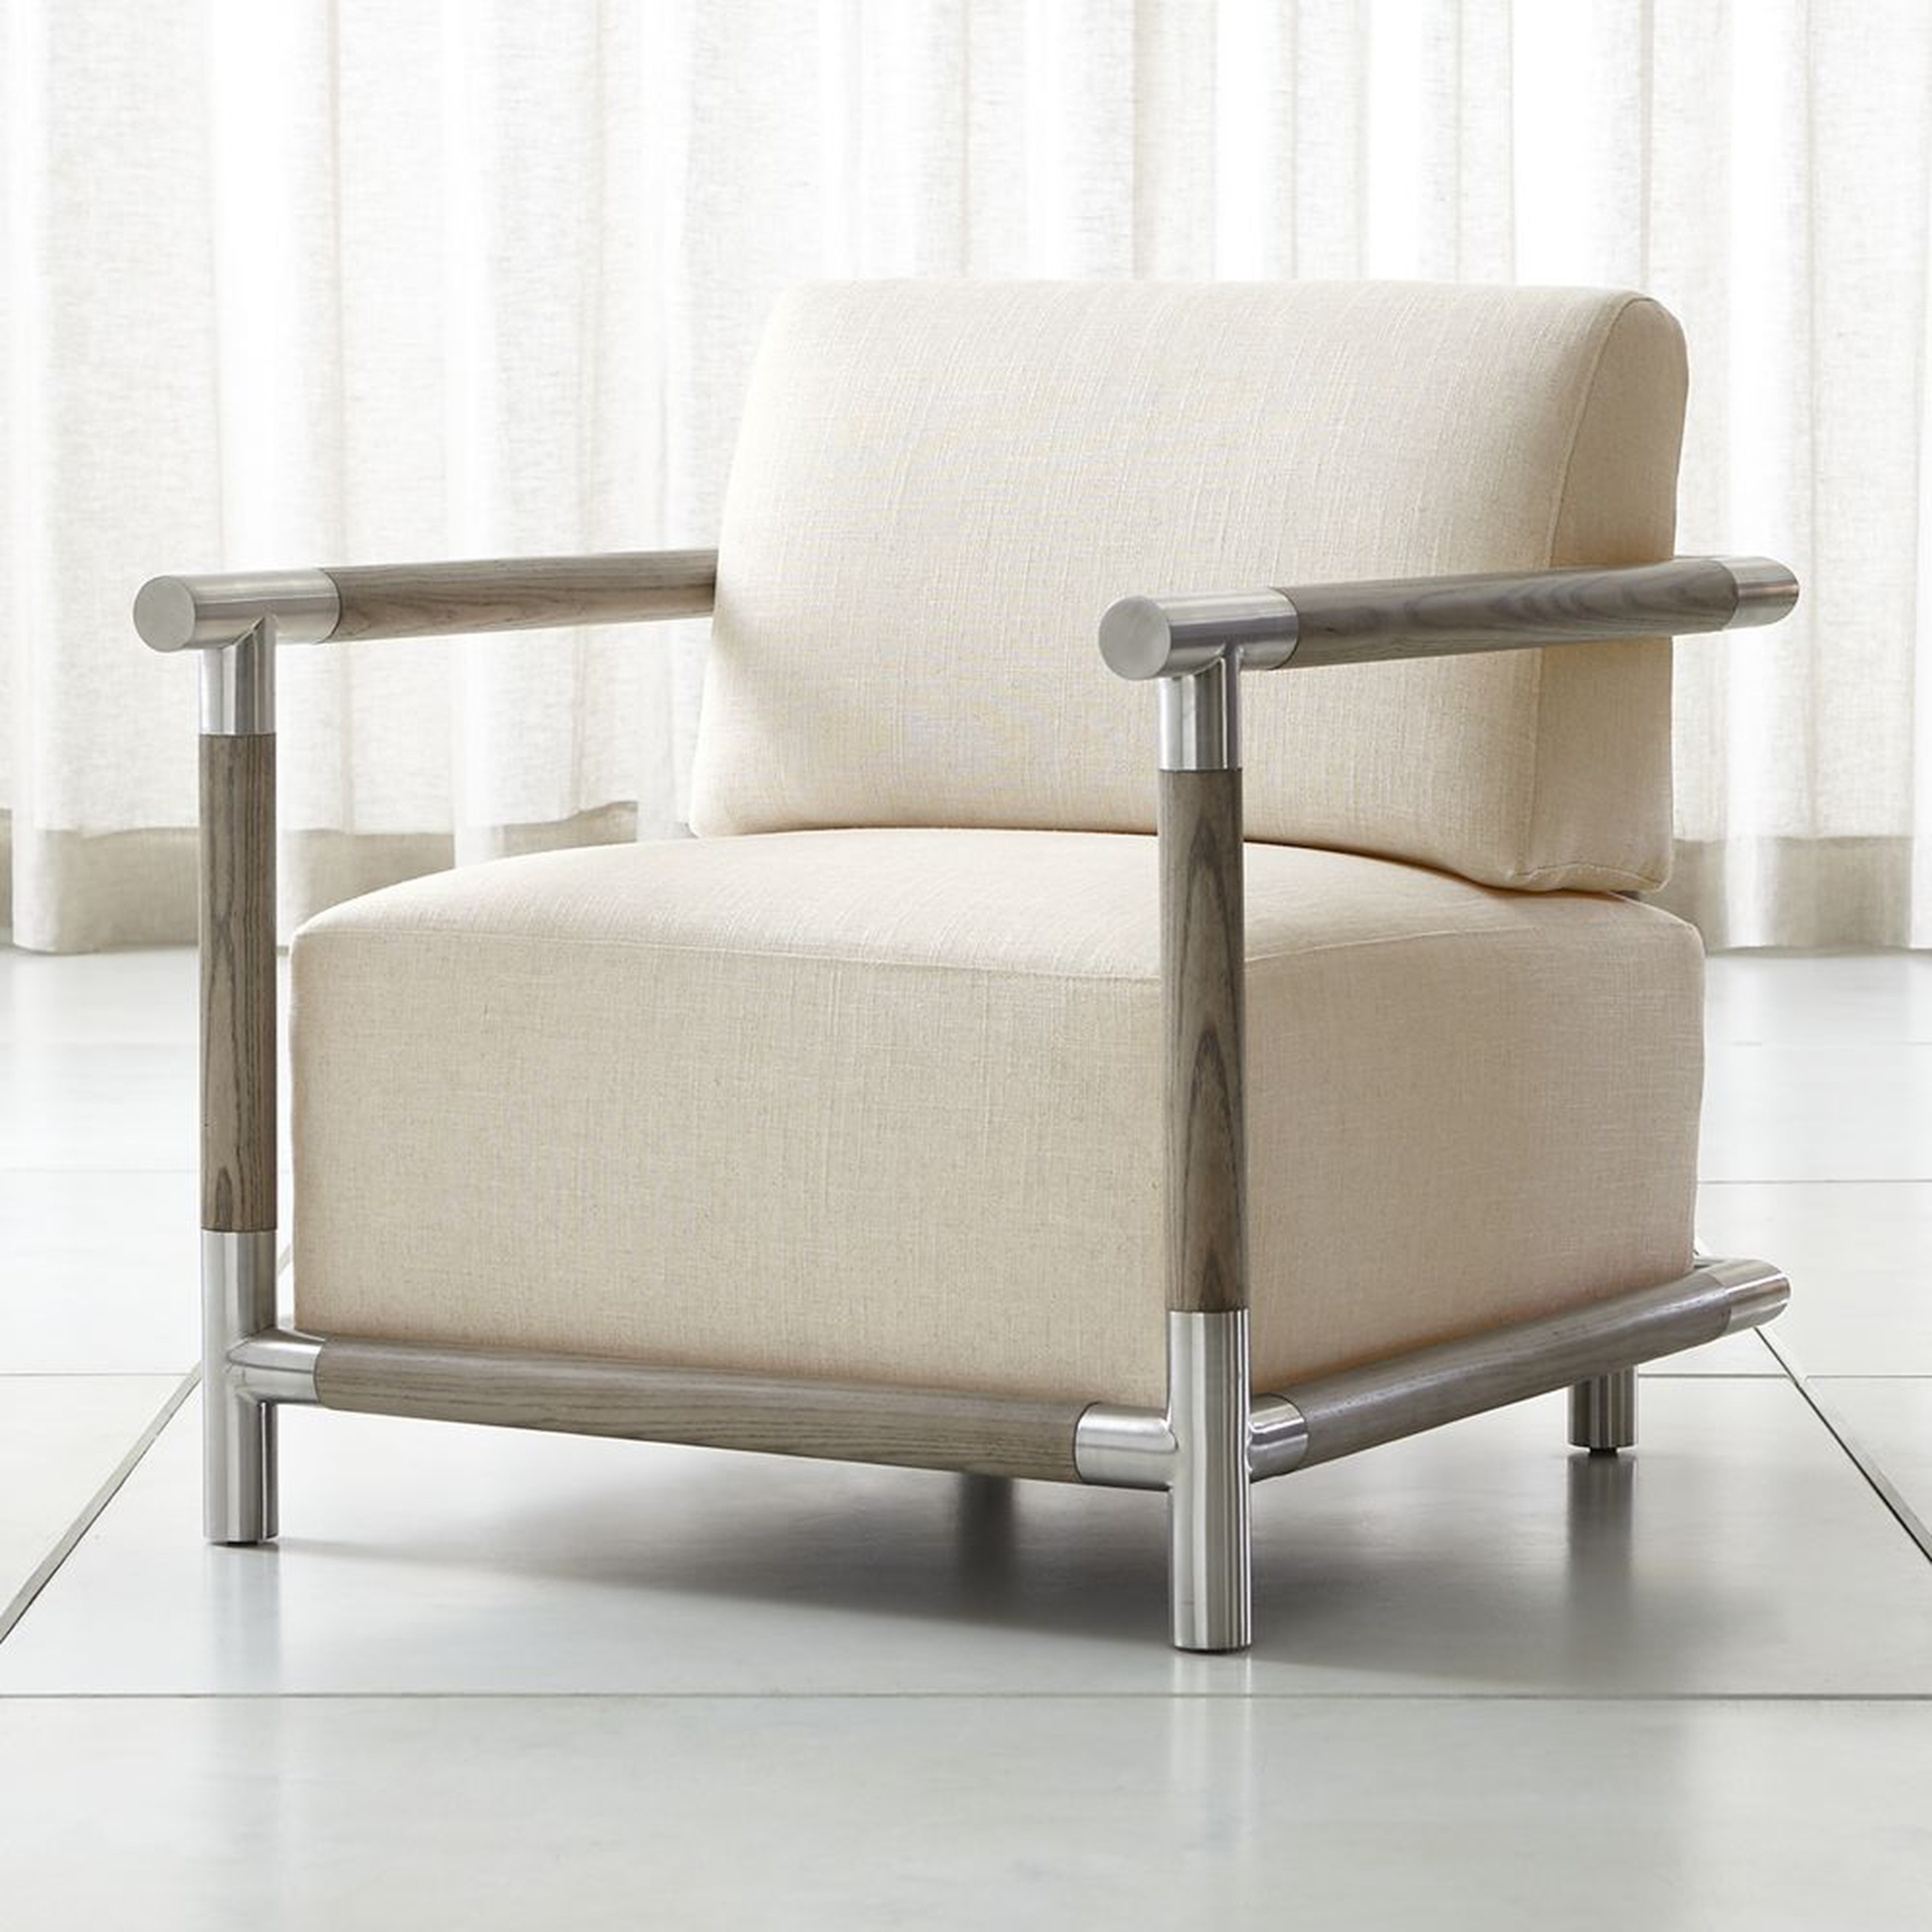 Alessia Wood and Metal Chair - Crate and Barrel